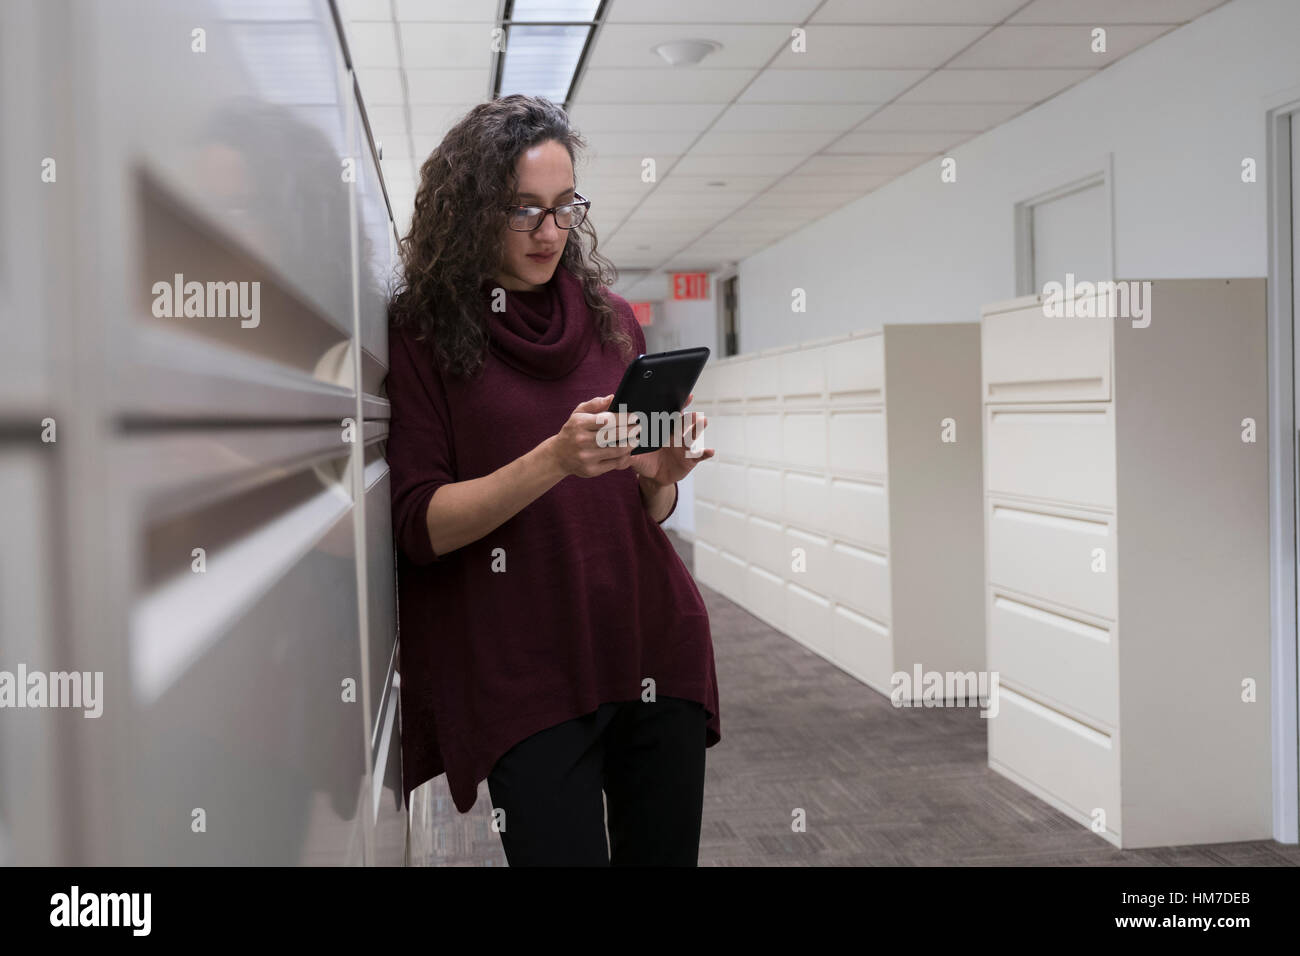 Young woman using digital tablet in corridor Stock Photo